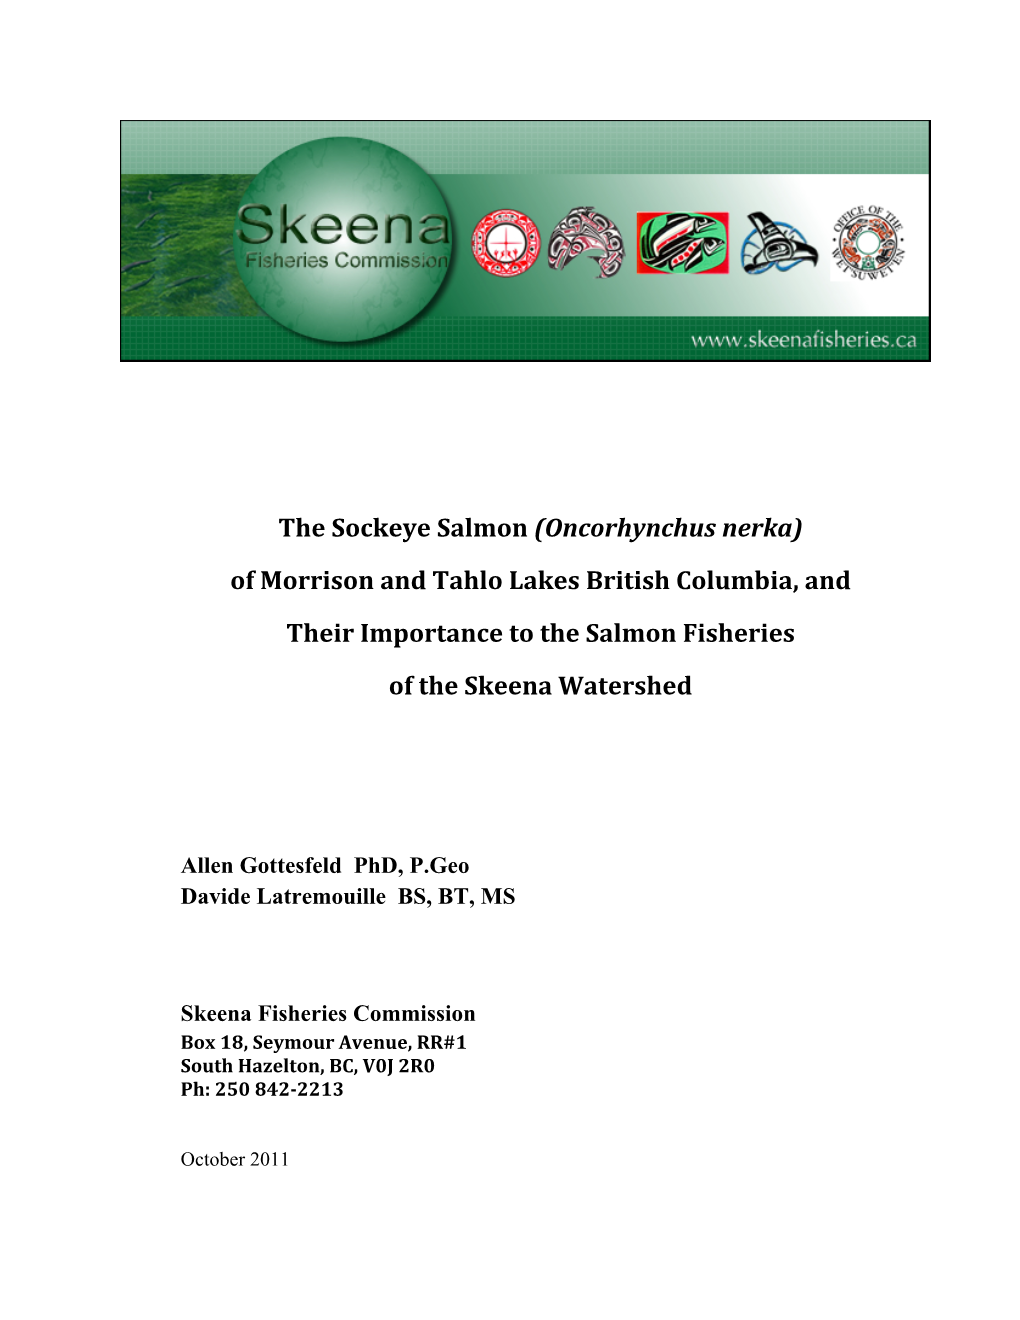 The Sockeye Salmon (Oncorhynchus Nerka) of Morrison and Tahlo Lakes British Columbia, and Their Importance to the Salmon Fisheries of the Skeena Watershed